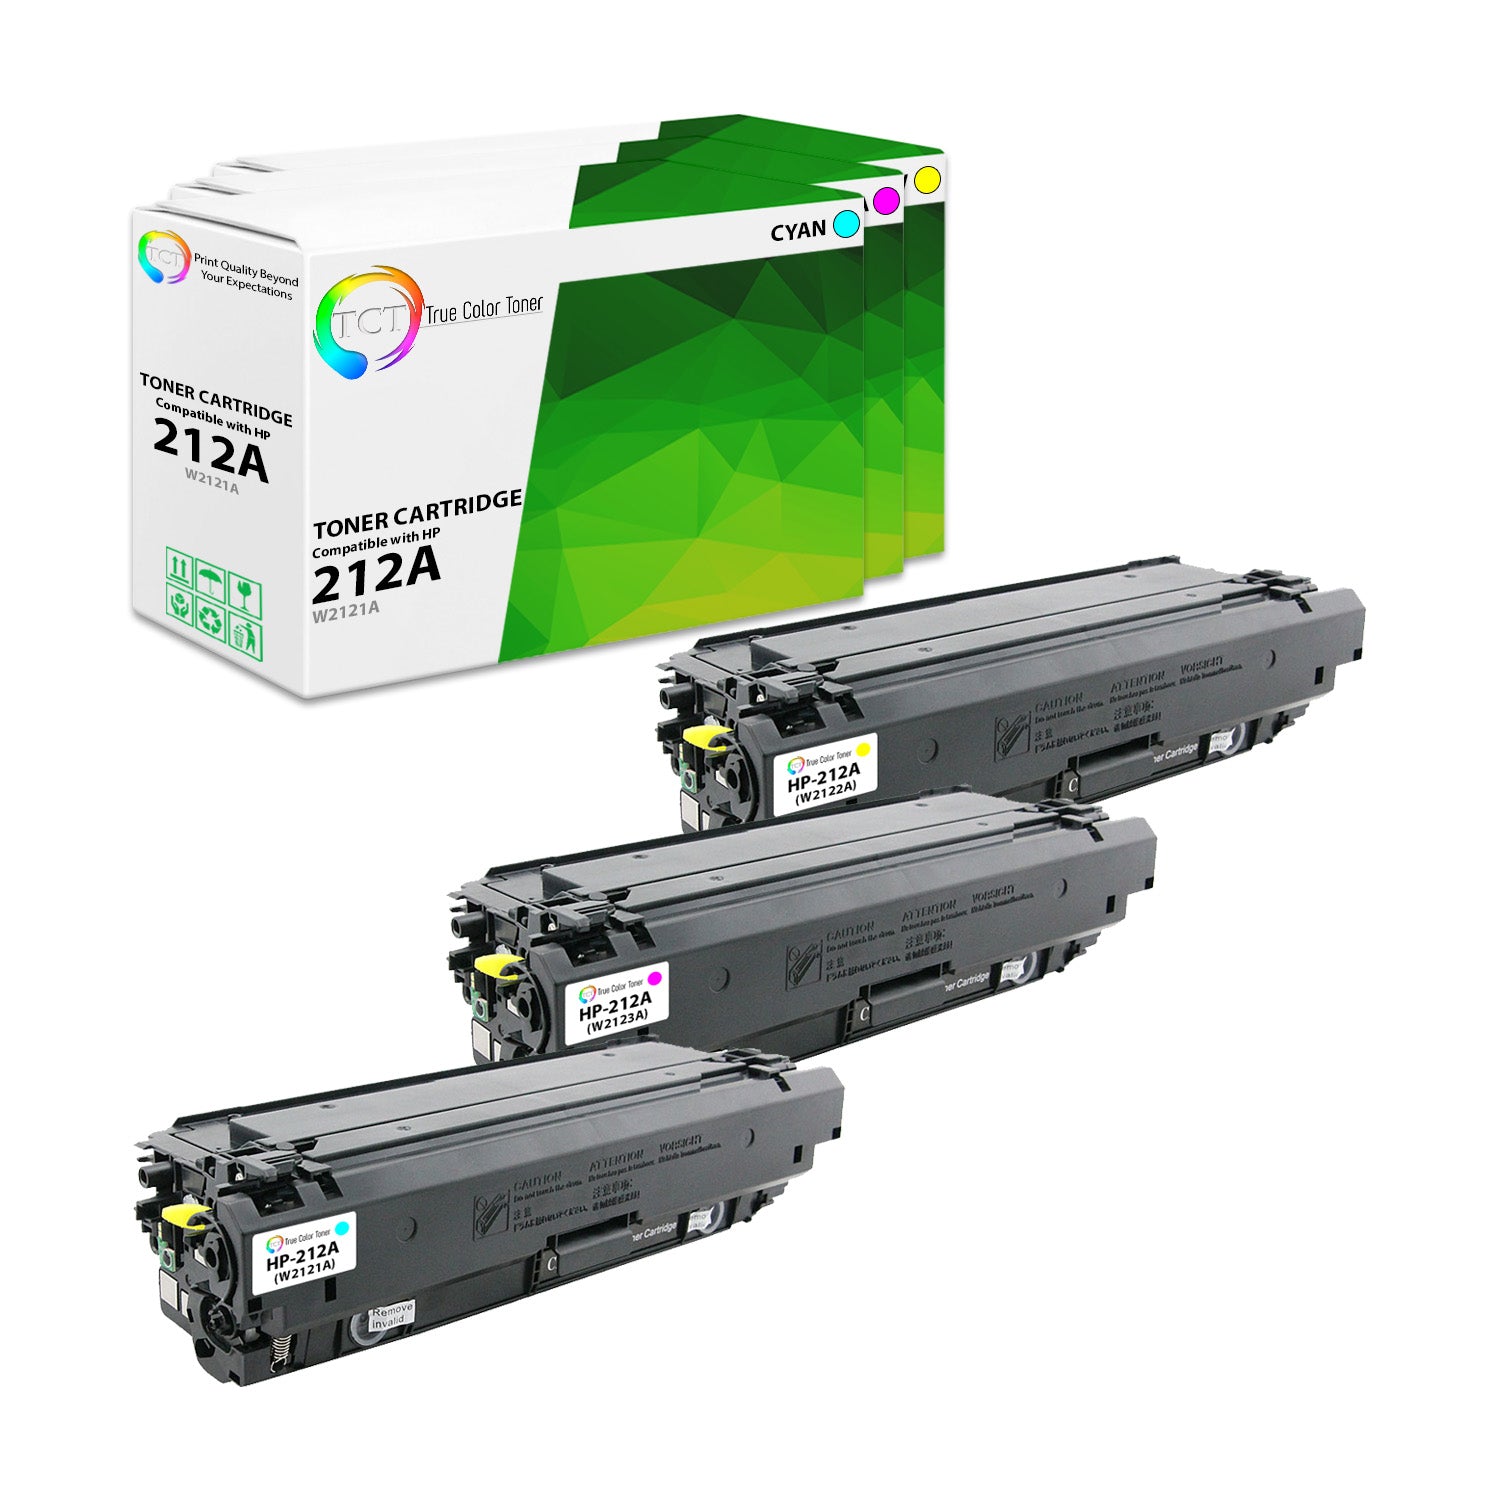 TCT Compatible Toner Cartridge Replacement for the HP 212A Series - 3 Pack (C, M, Y)